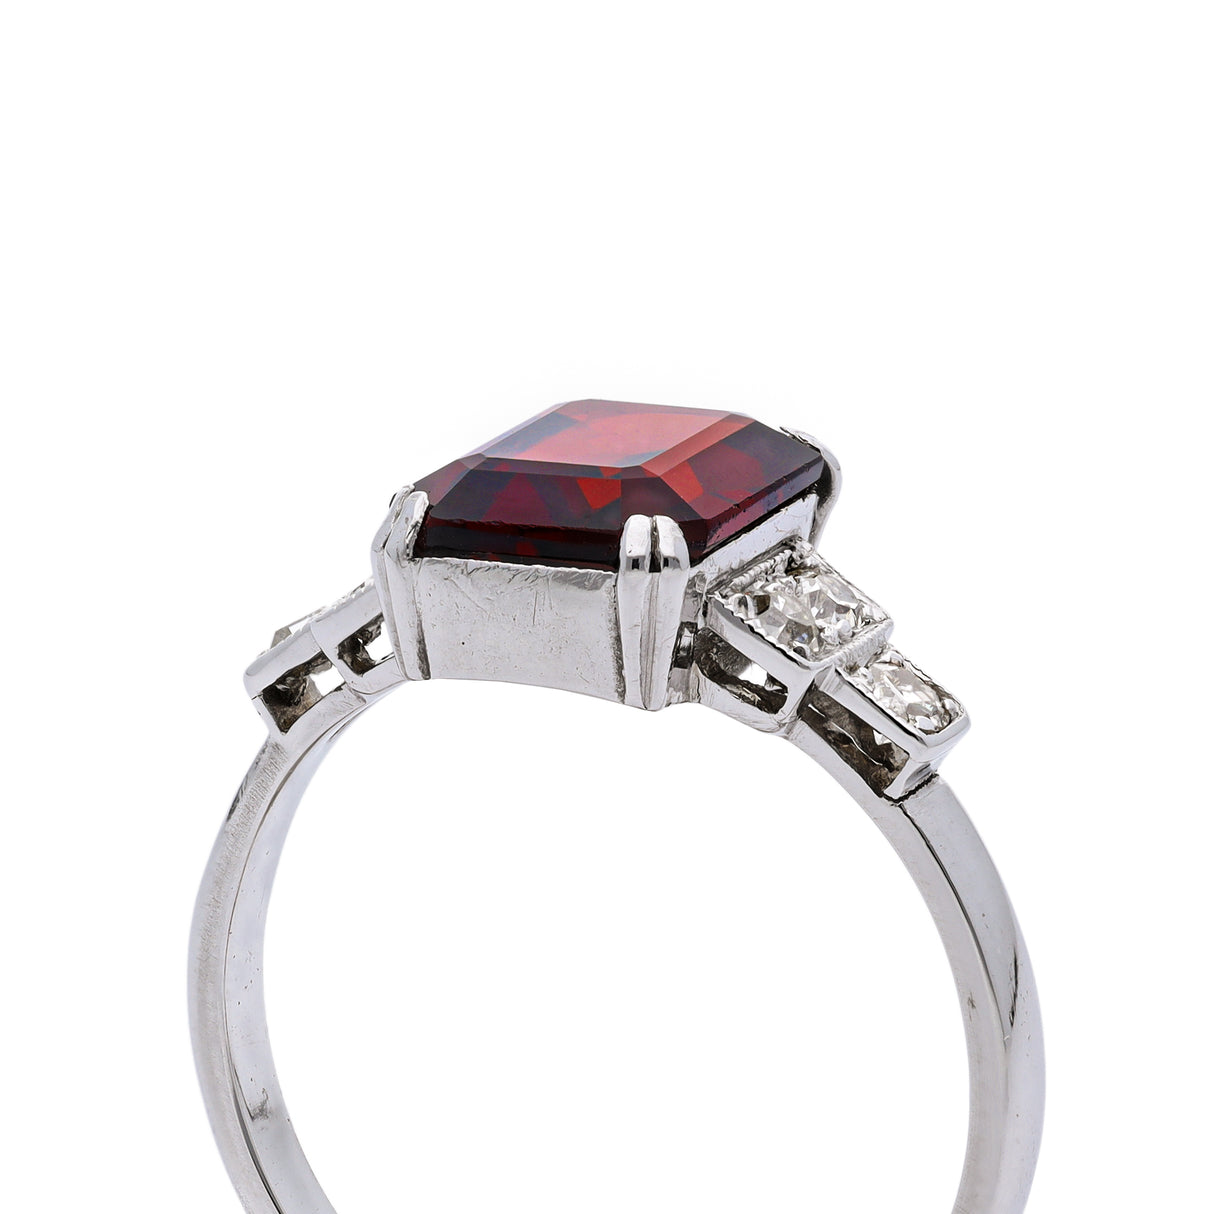 Art Deco garnet and diamond engagement ring, side view.